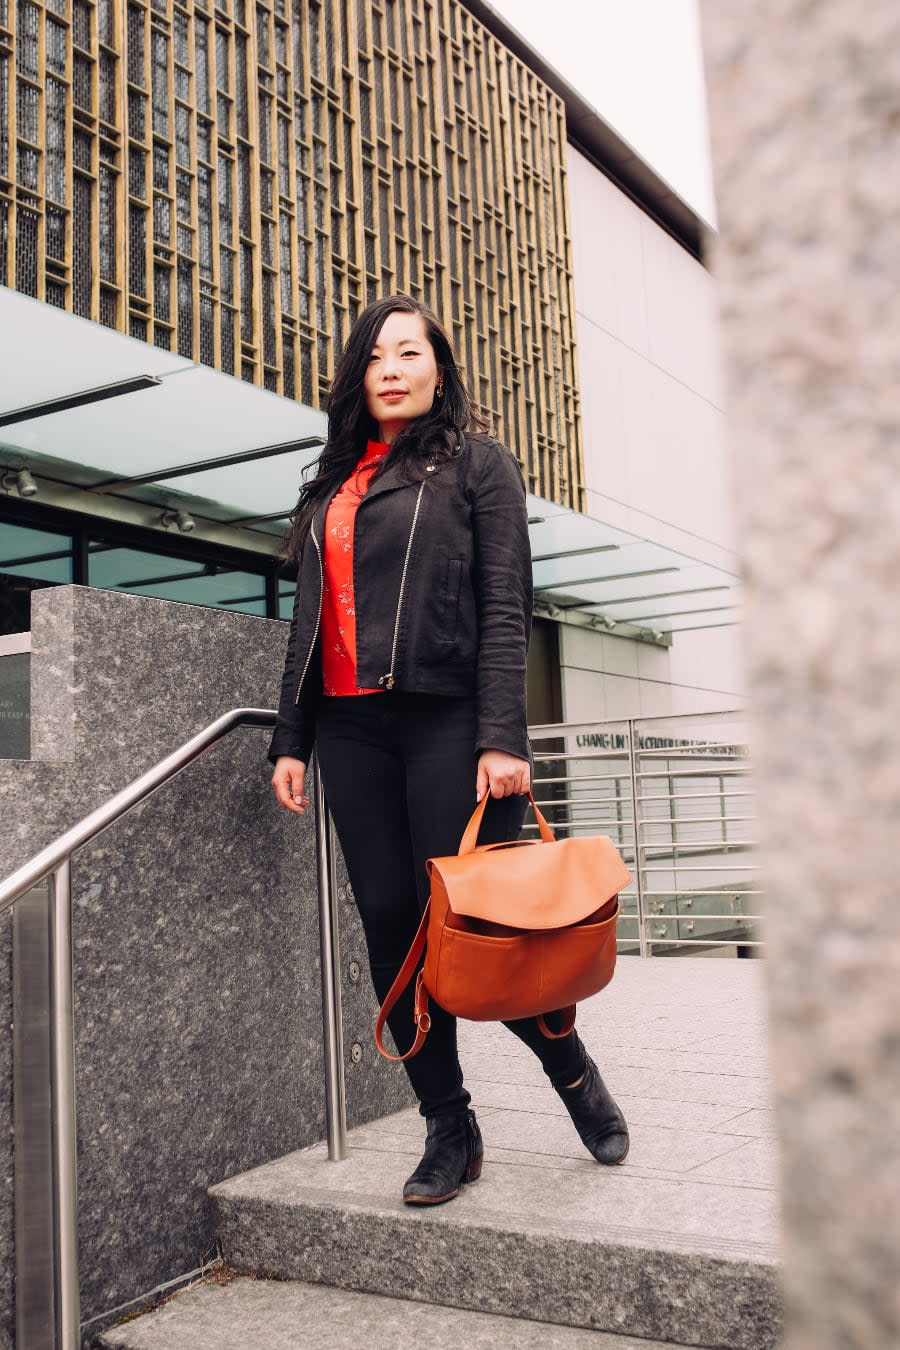 Photo of Shirley Wu outdoors, staning on a stairway holding her bag.